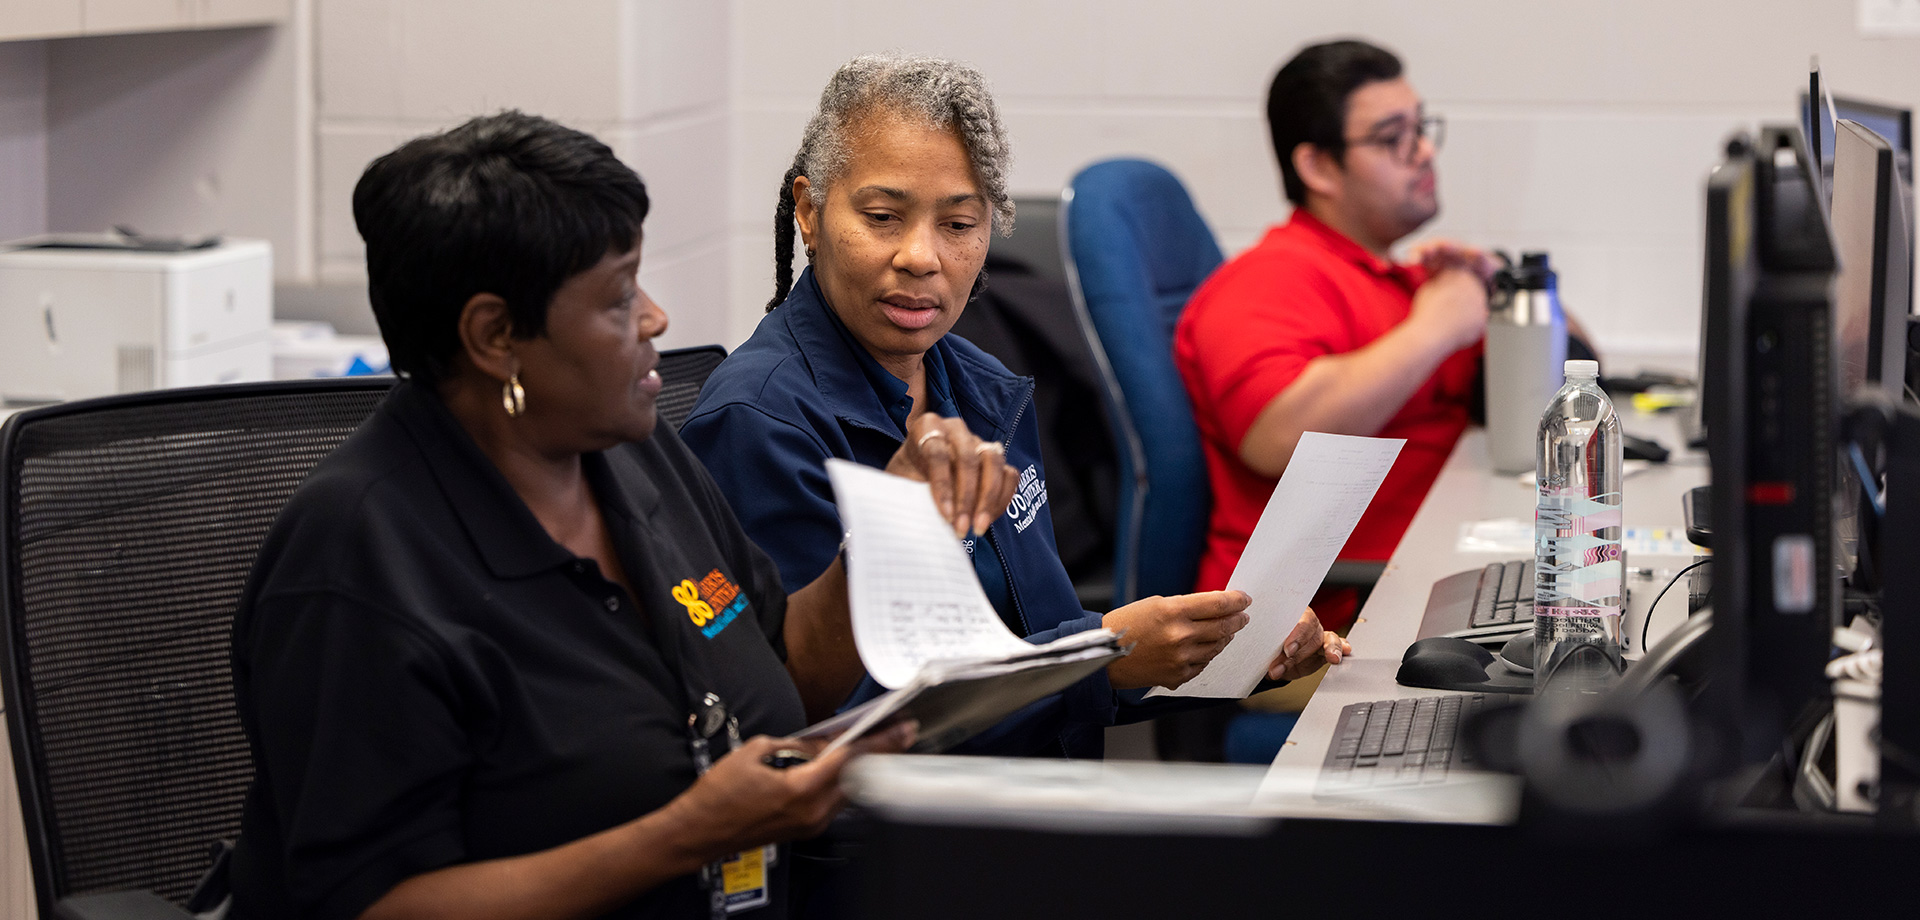 Harris County Mental Health Jail Diversion Program staff work inside the Harris County Jail diverting people mental illnesses prior to booking.